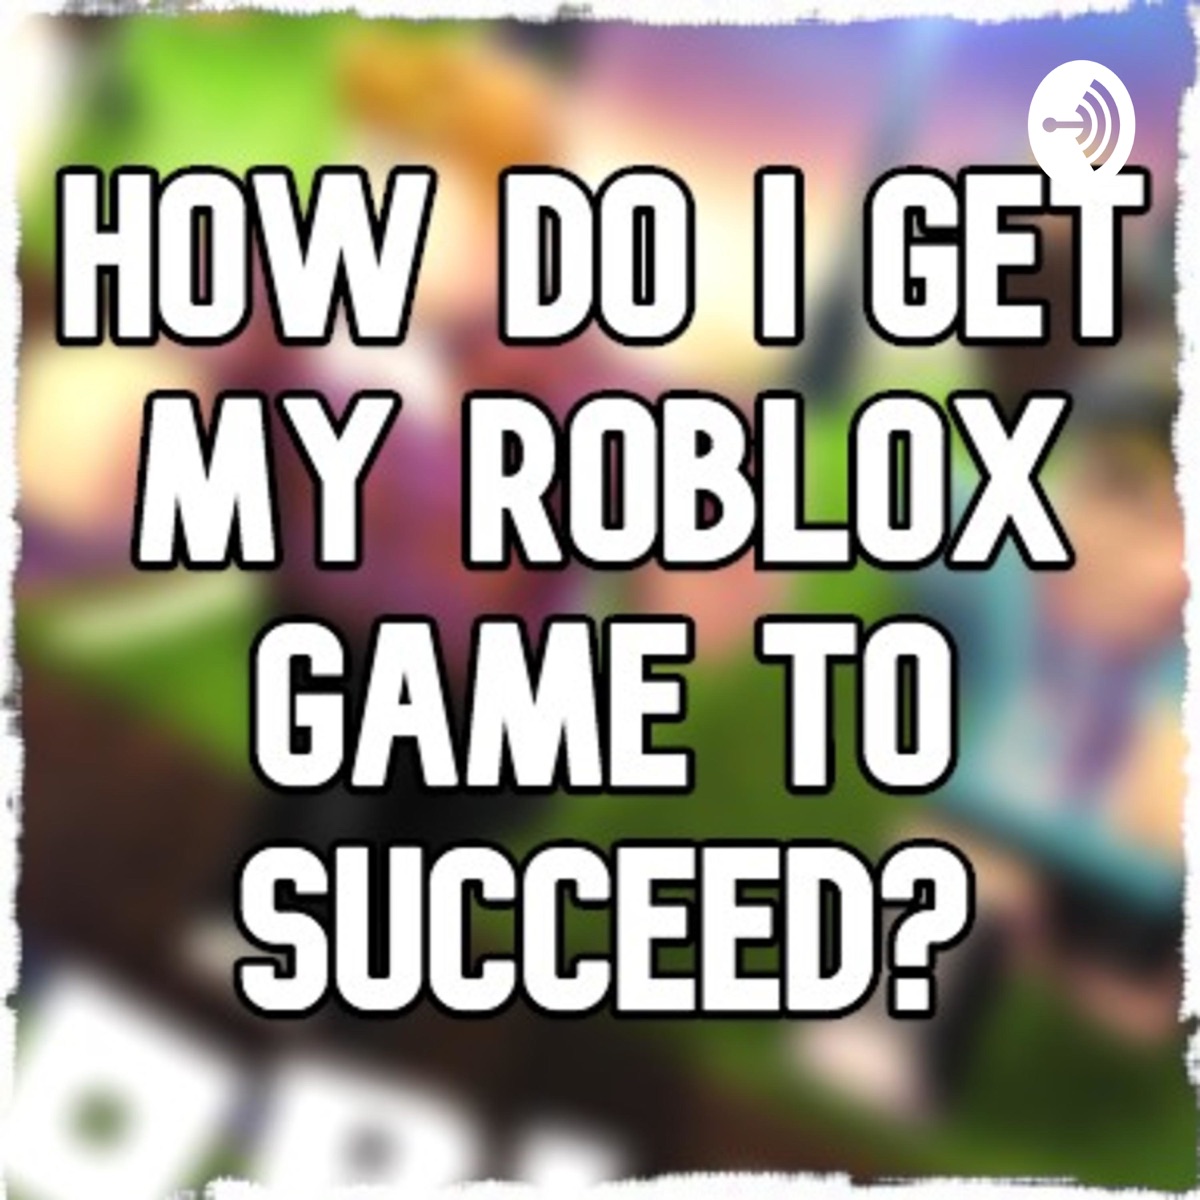 Related How Do I Make My Roblox Game Succeed Podcast Podtail - my roblox game